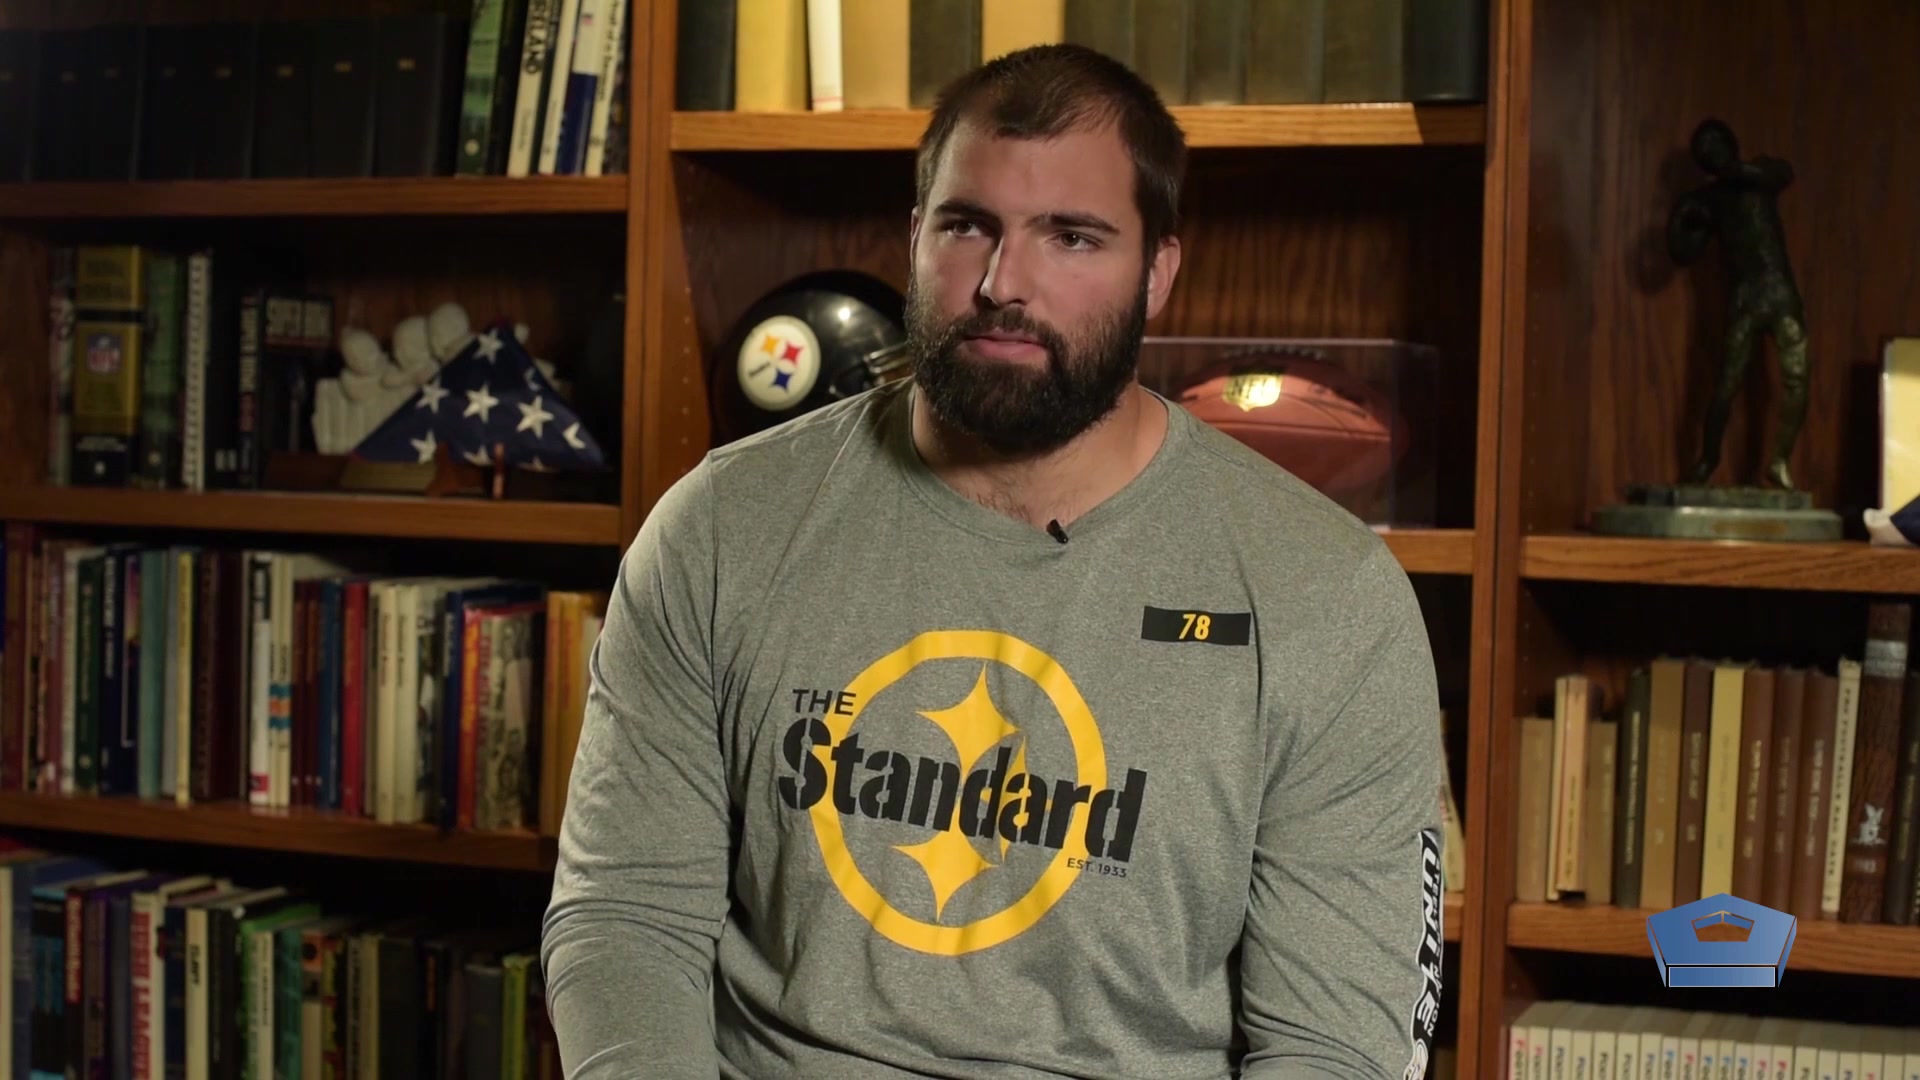 Alejandro Villanueva went from defending our country in the trenches of Afghanistan to defending the blind side of NFL quarterbacks in the trenches of an offensive line. He says the two worlds are different, yet they share certain traits.